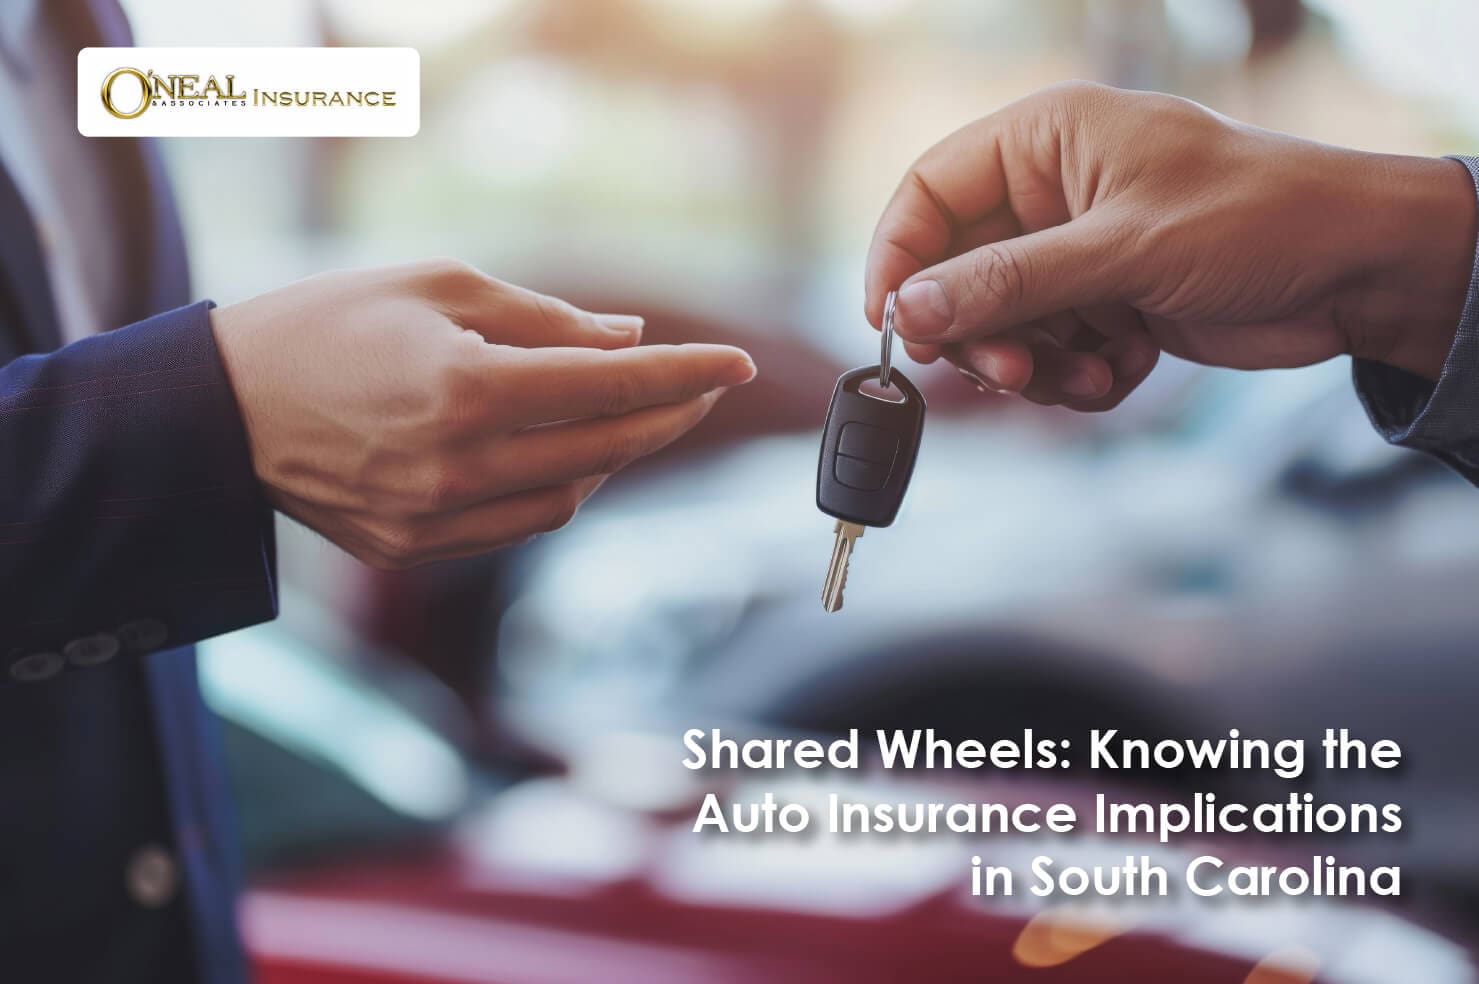 hared Wheels: Knowing the Auto Insurance Implications in South Carolina